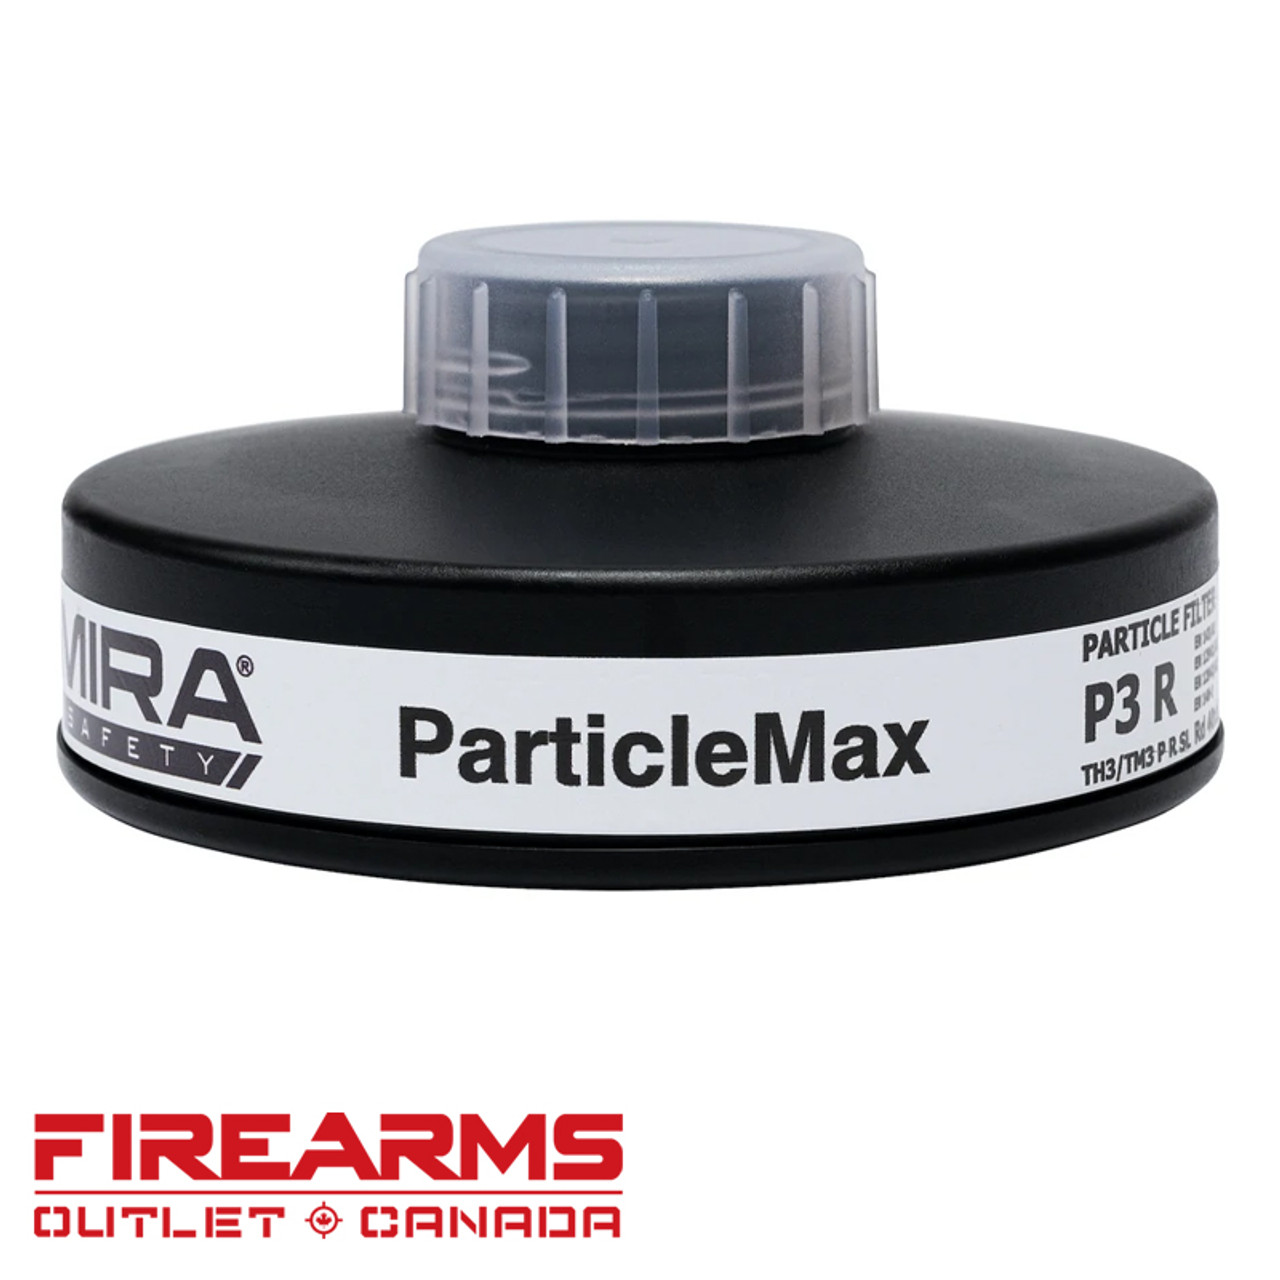 Mira Safety ParticleMax P3 Virus Filter - 6 Pack [PARTICLEMAX]